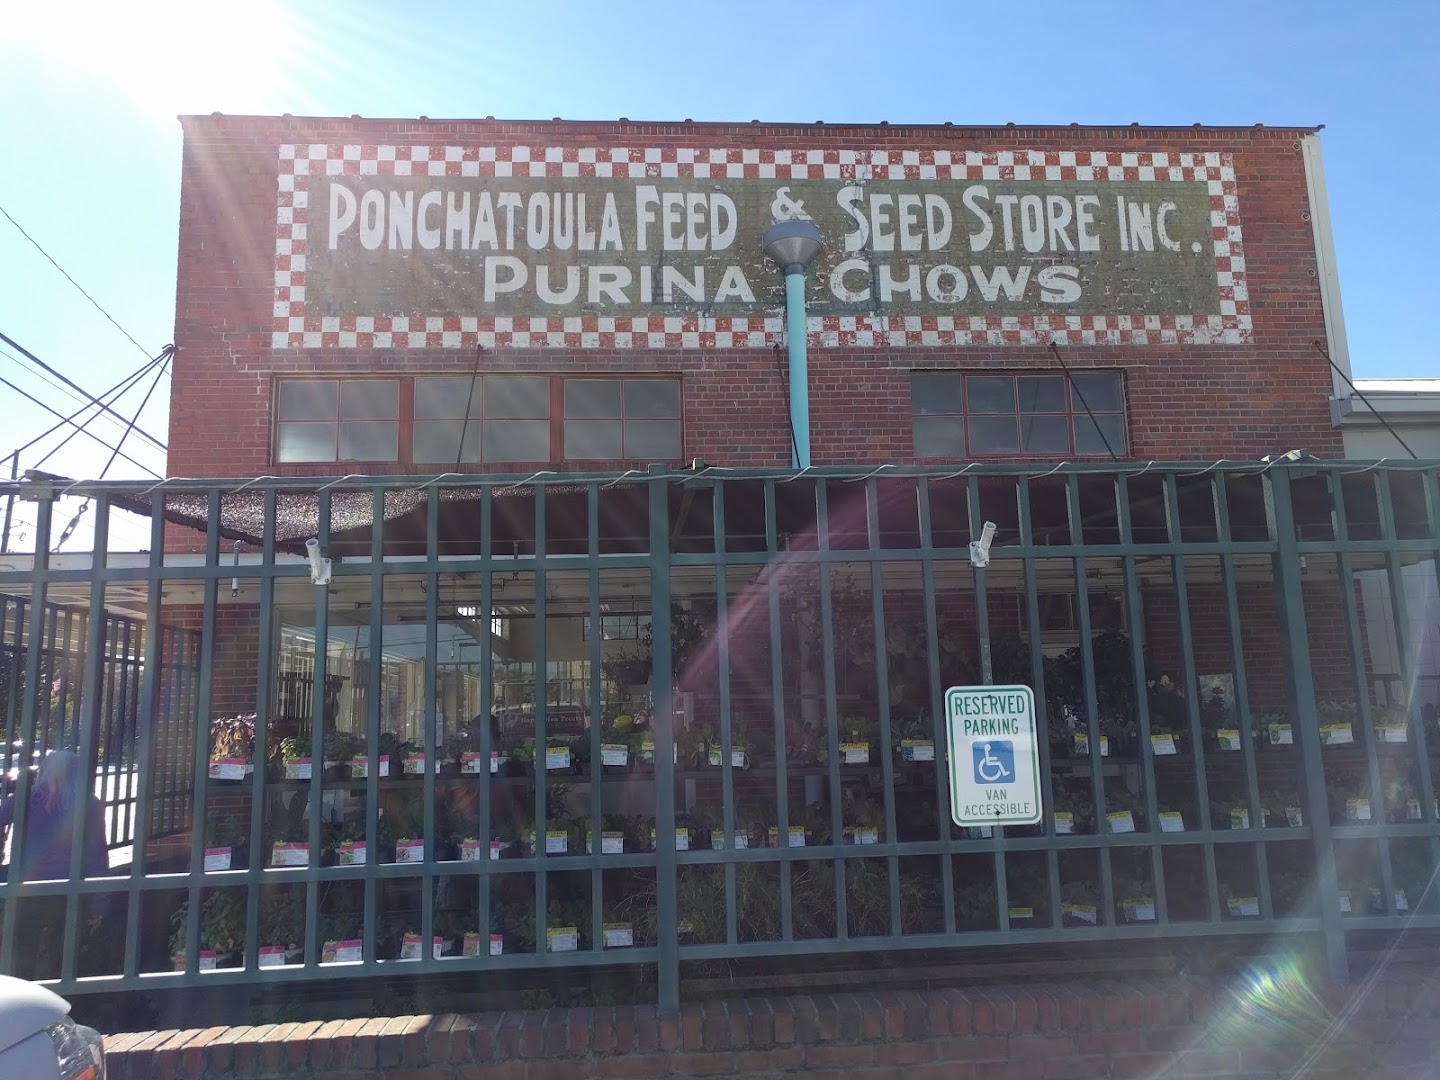 Ponchatoula Feed & Seed Store